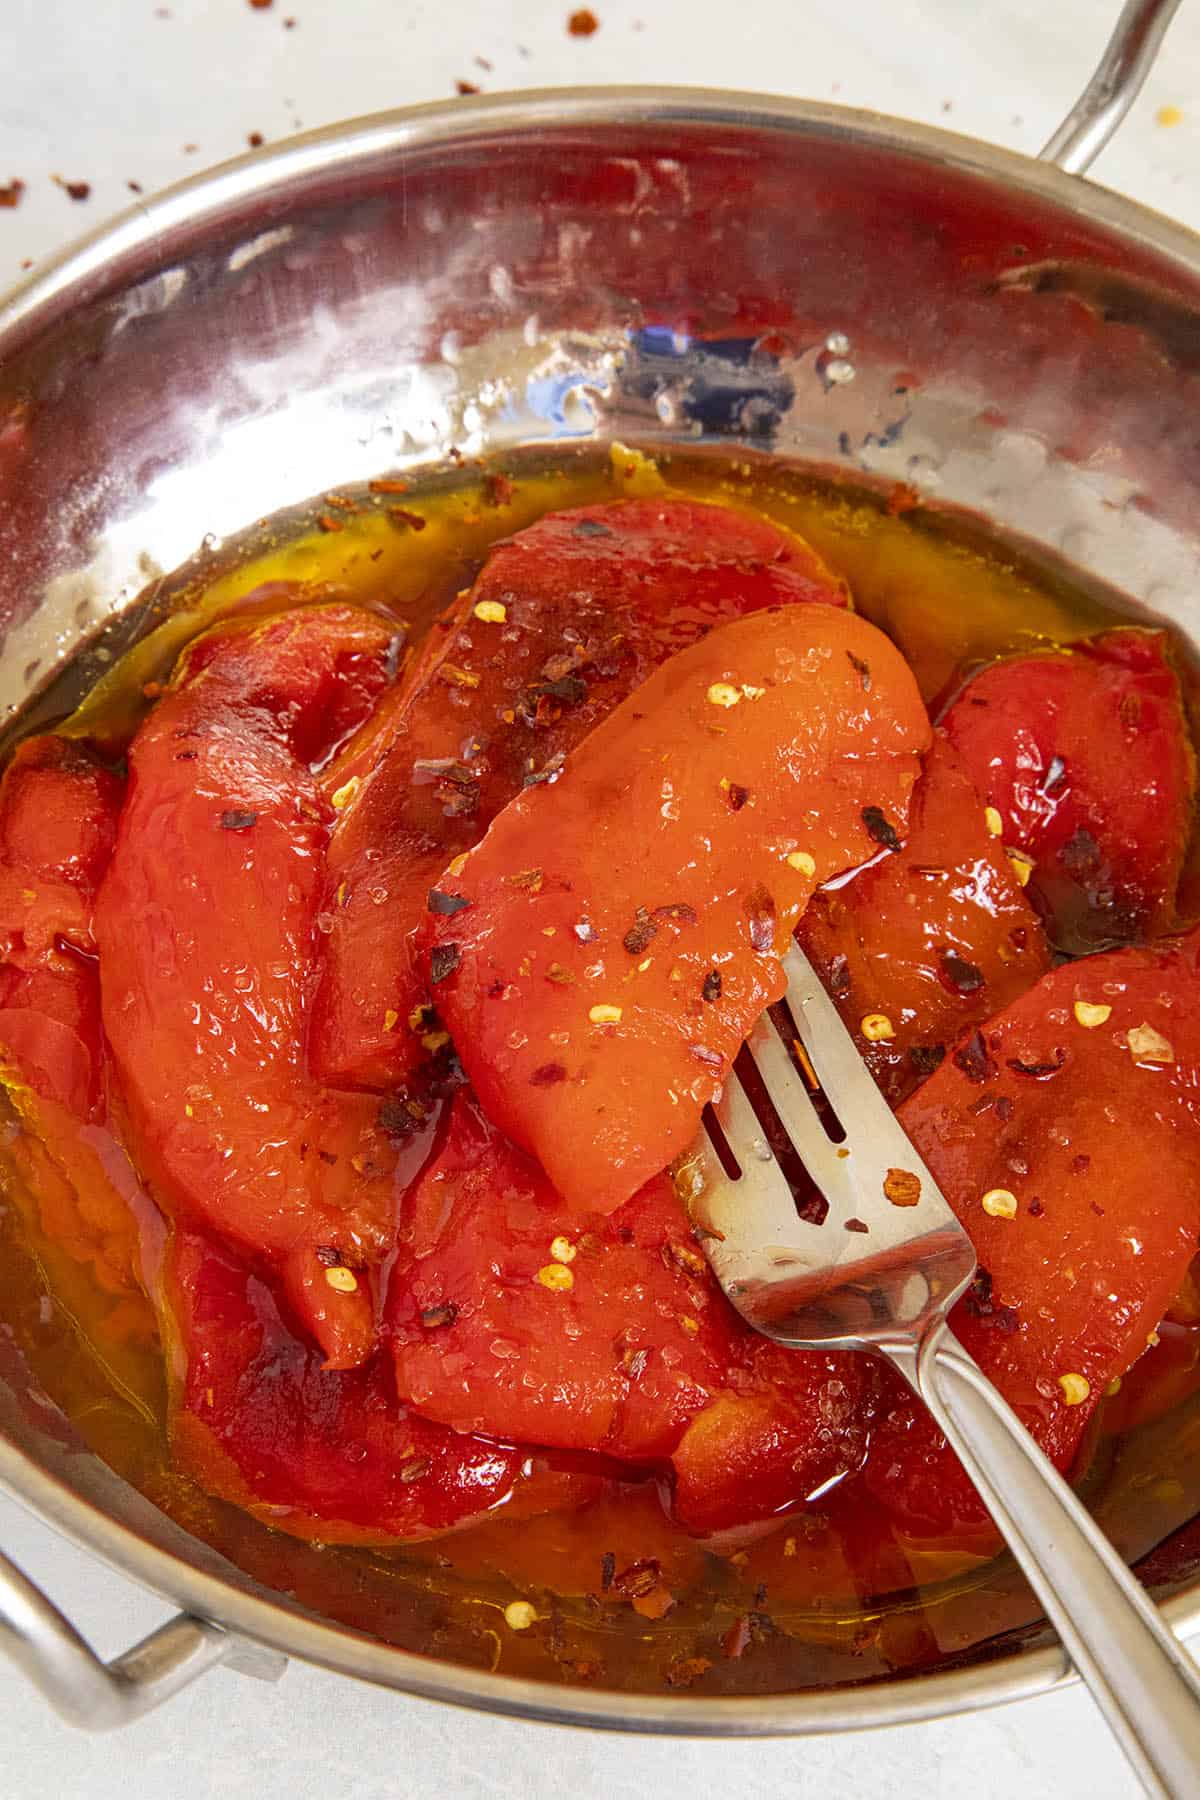 Roasted Red Peppers made at home